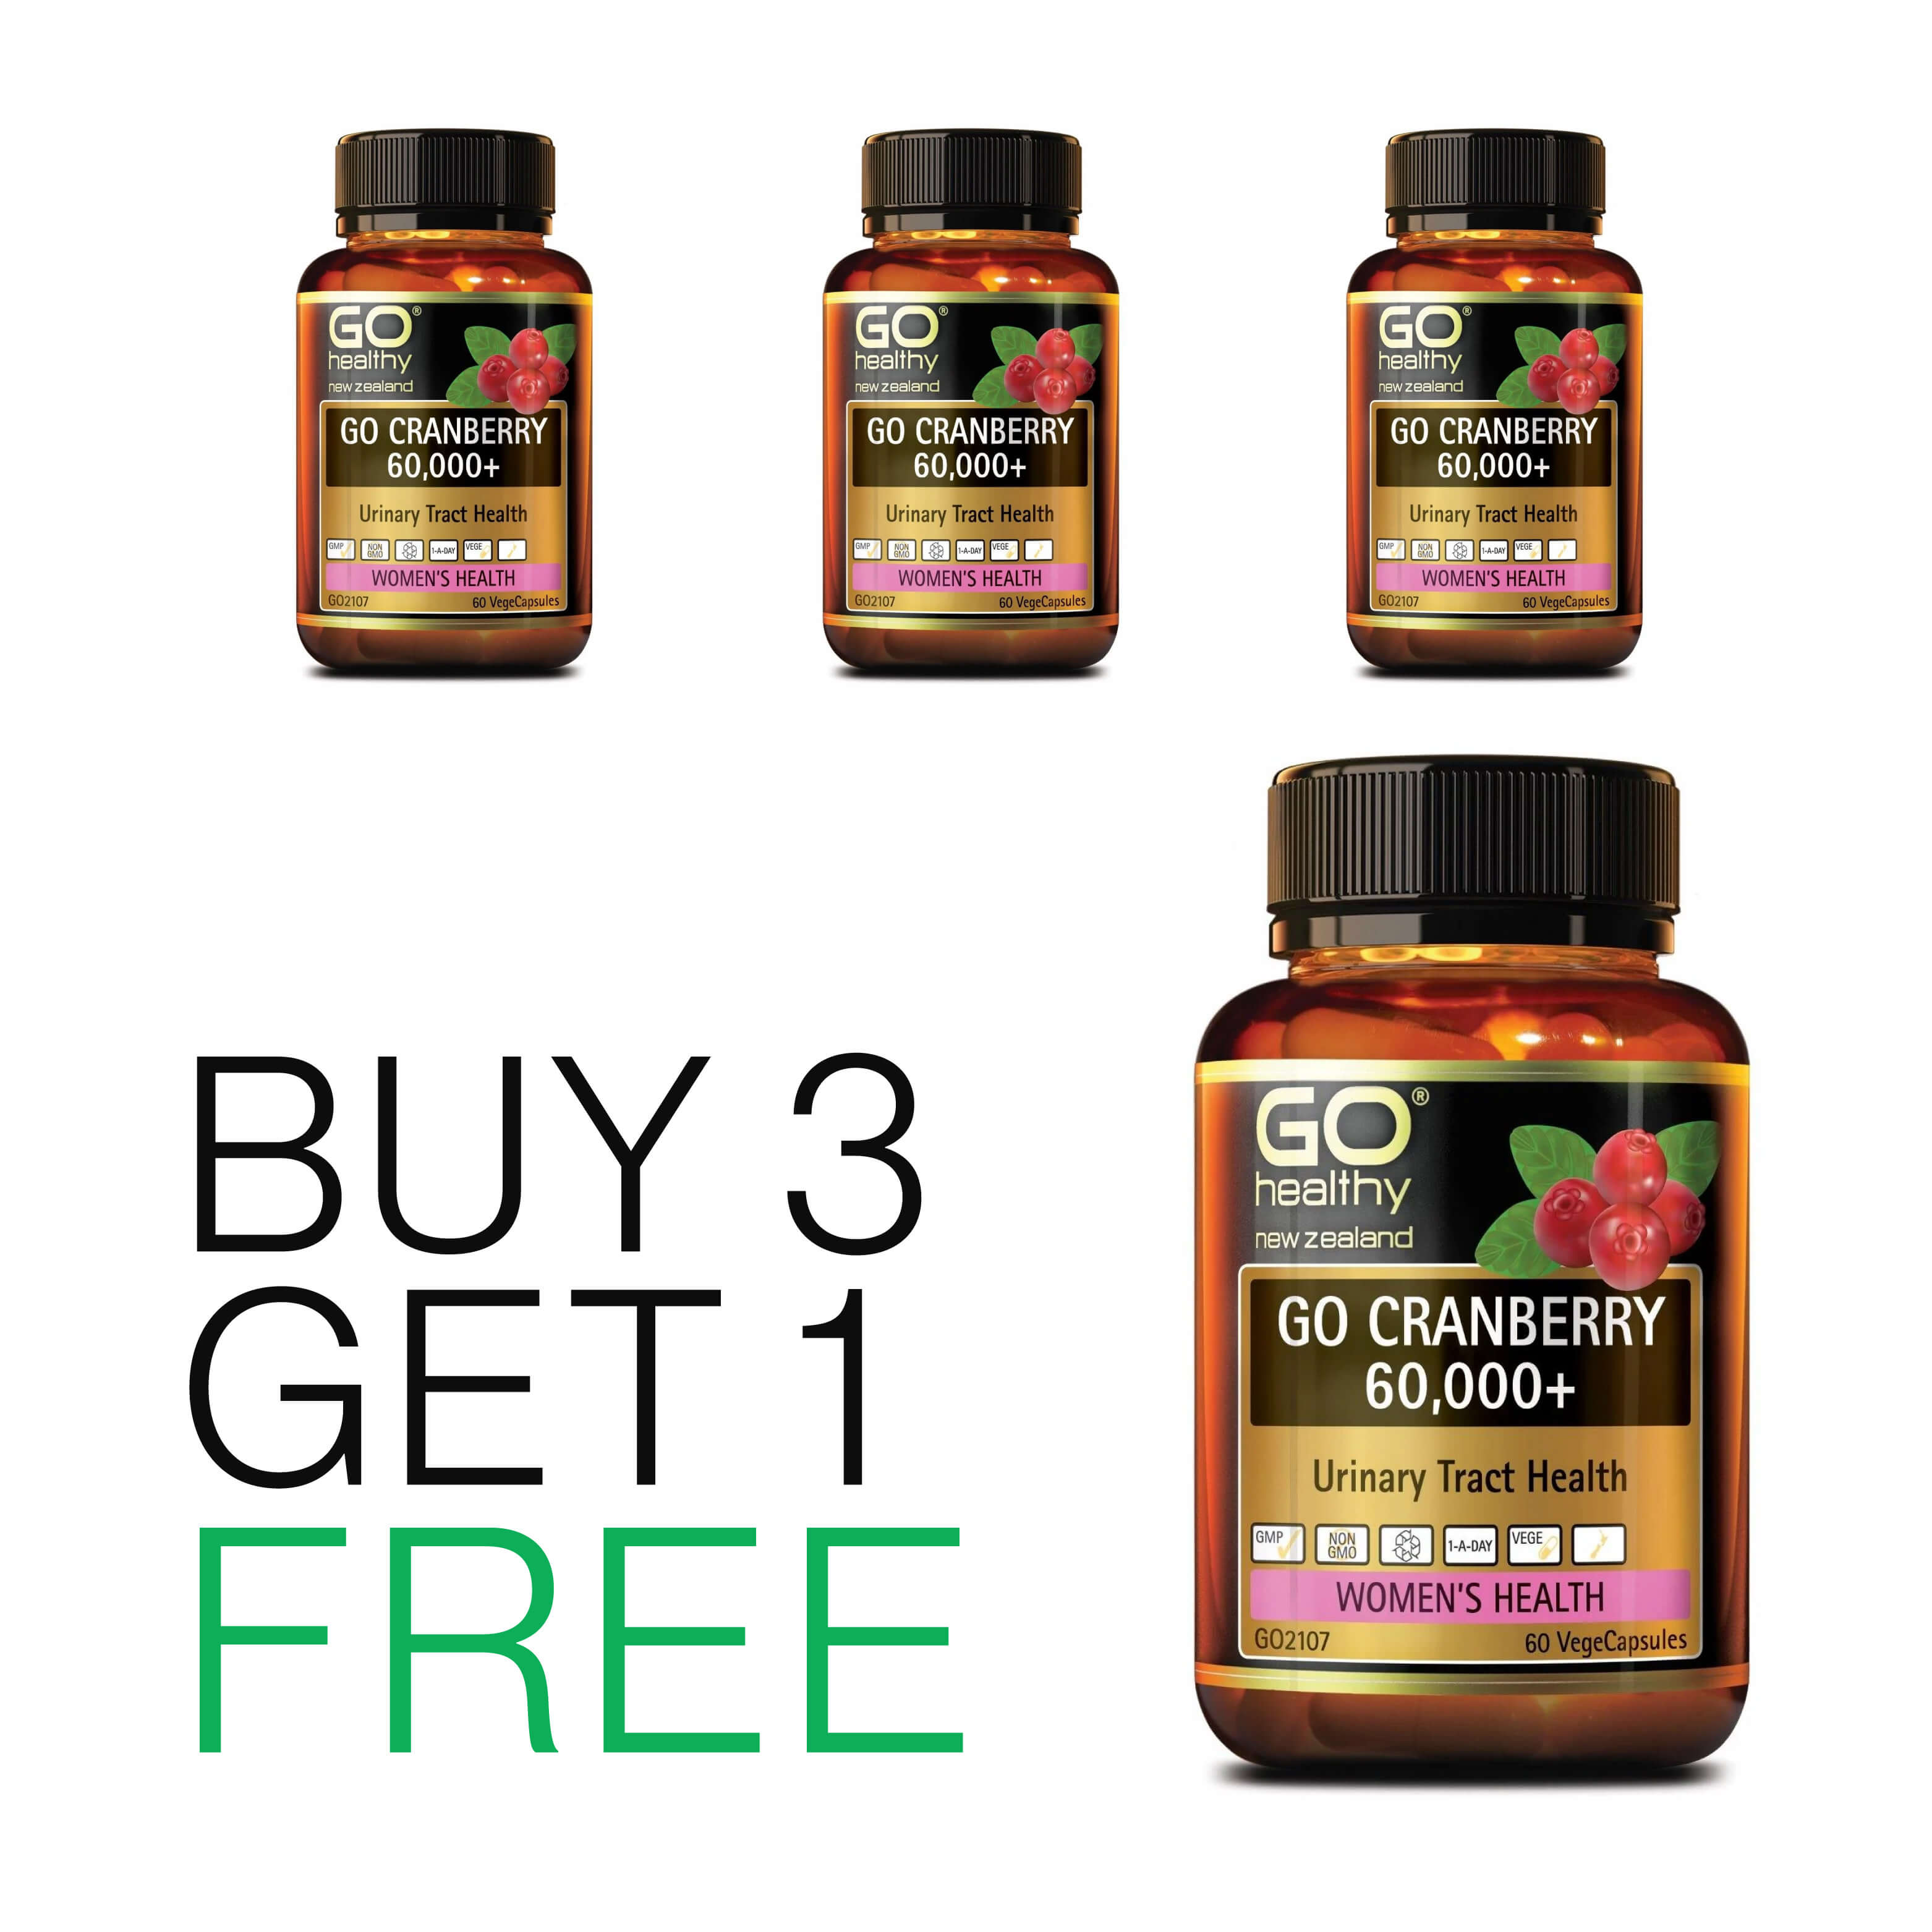 Buy 3 Get 1 Free - Go Healthy Cranberry 60,000+ 60 vege capsules